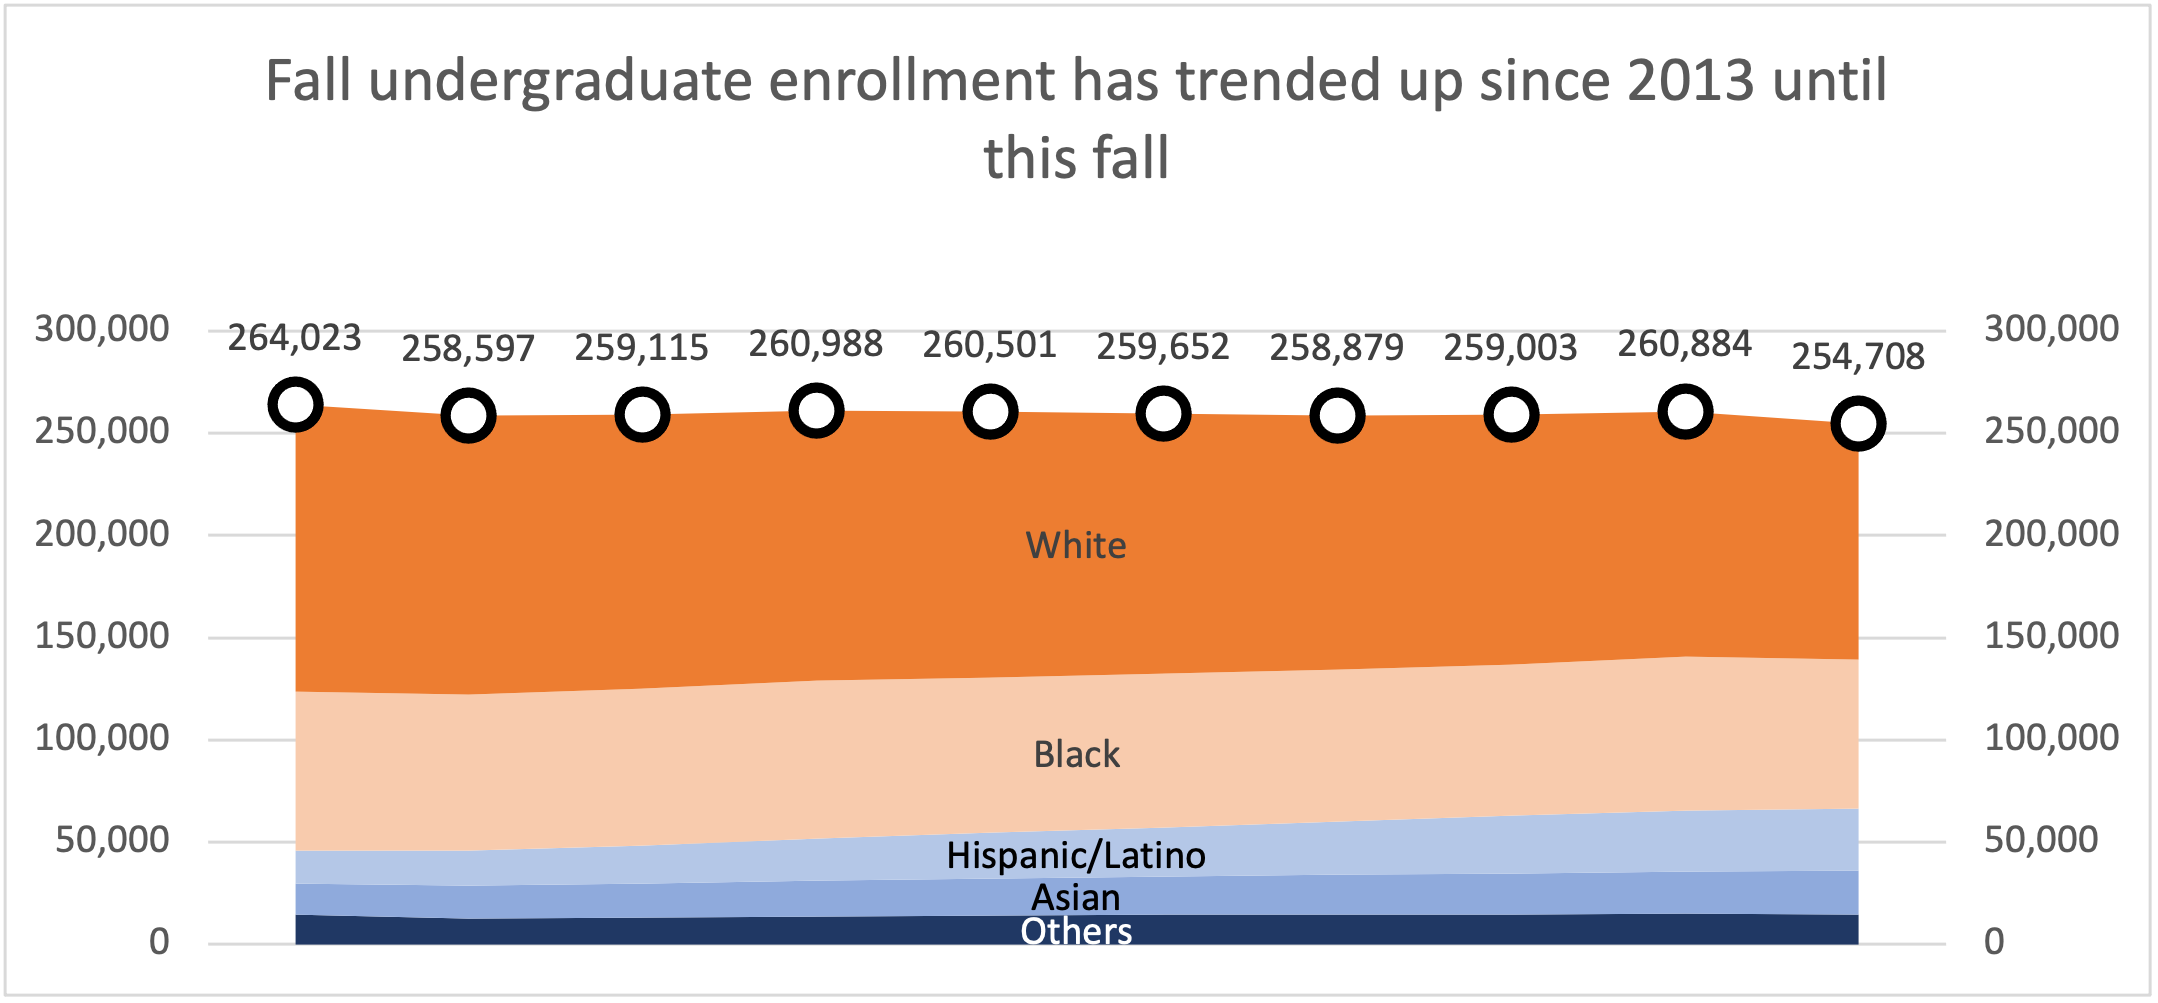 Overall enrollment also took a slight hit this fall.